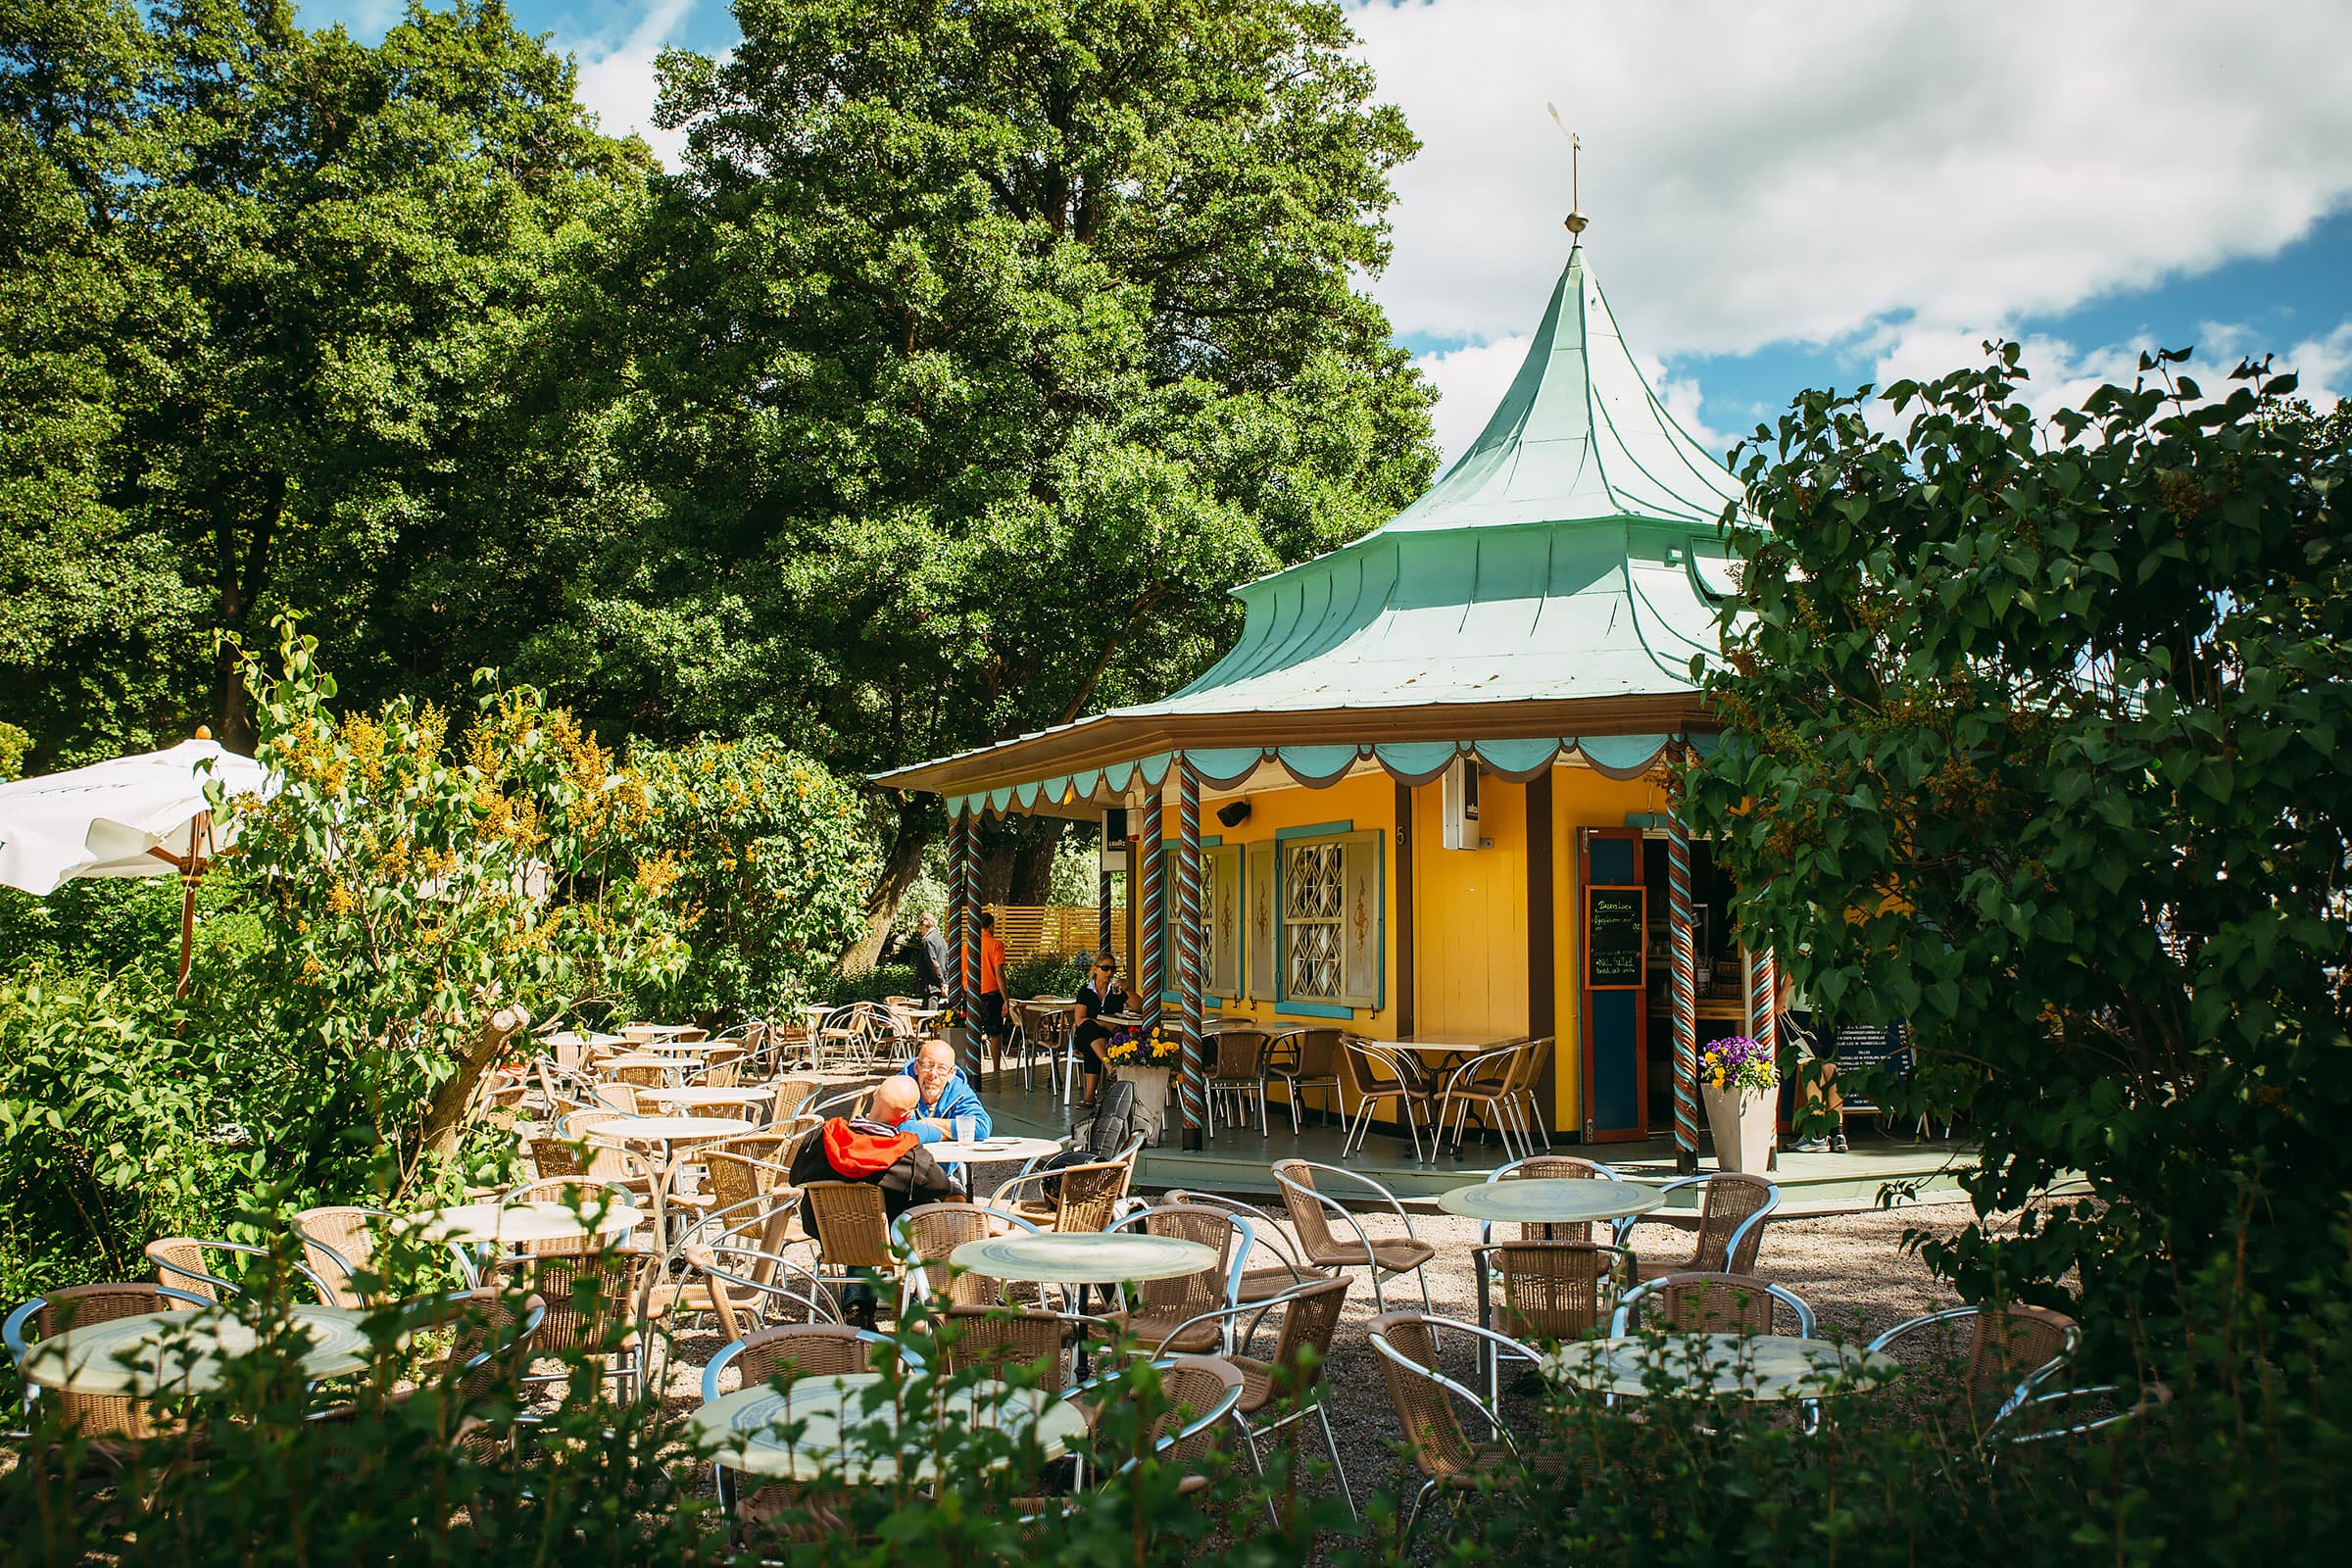 Charming caf&eacute;s in green, leafy surroundings